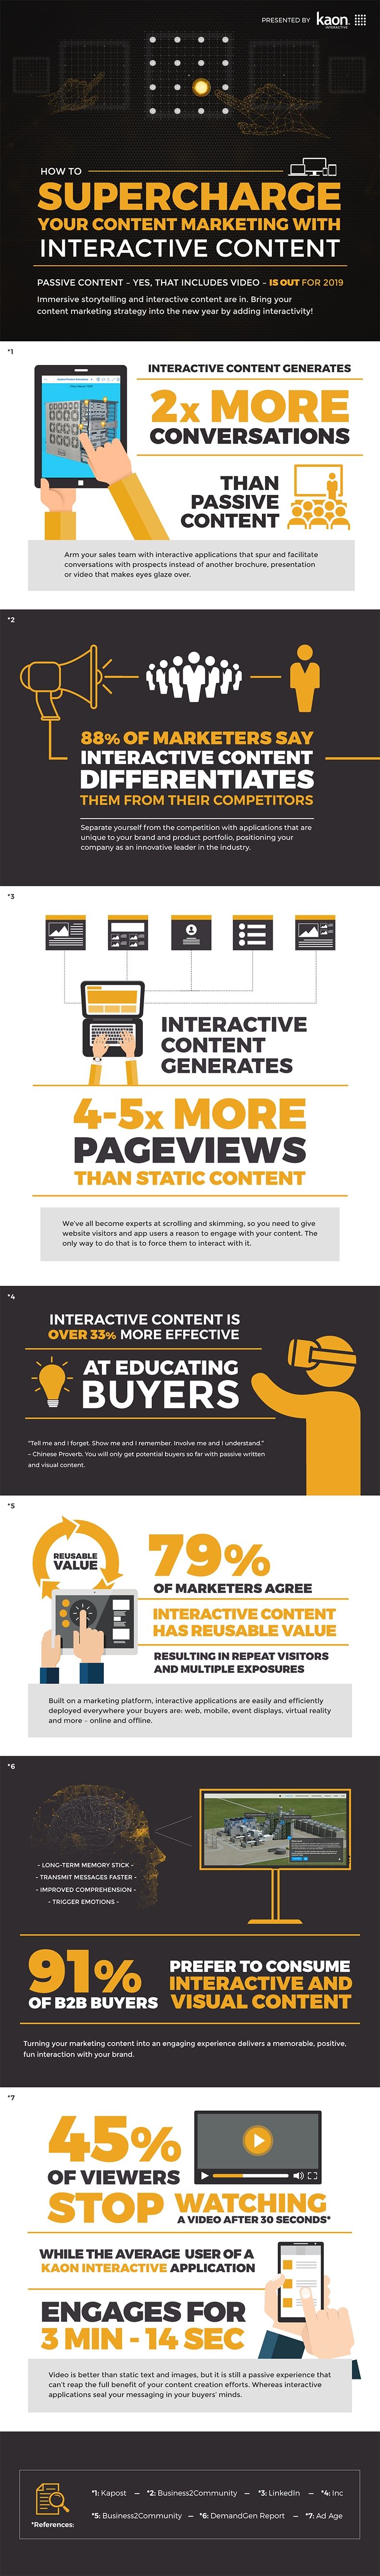 Supercharge Your Content Marketing With Interactive Content